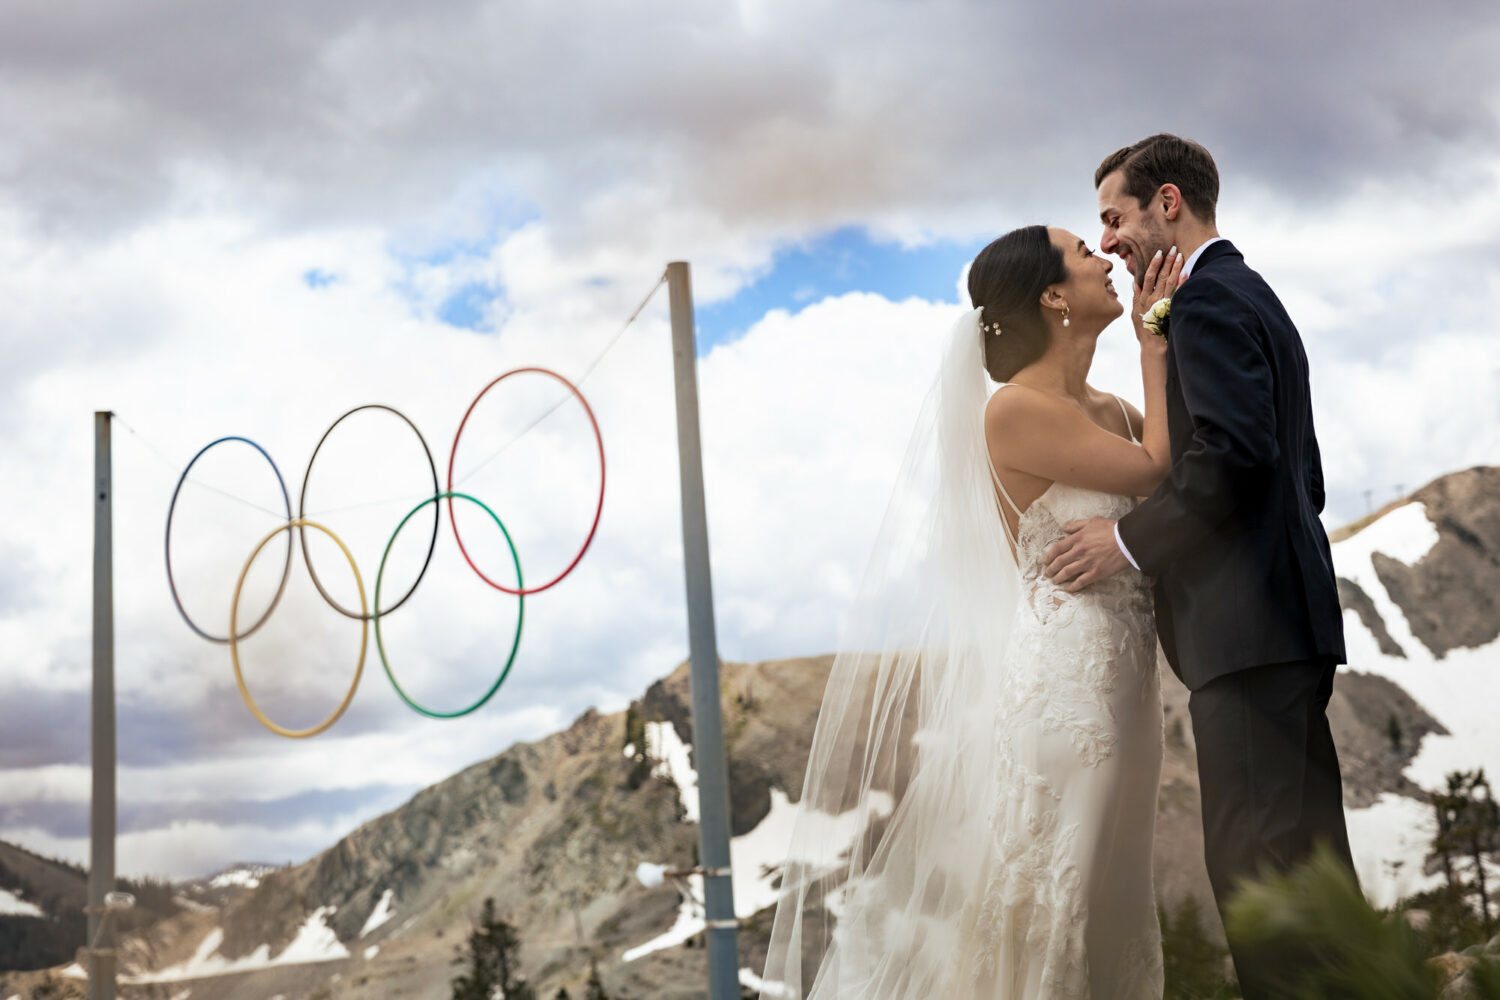 A bride and groom that chose to get married in Olympic Valley share a special moment in front of the Olympic rings.